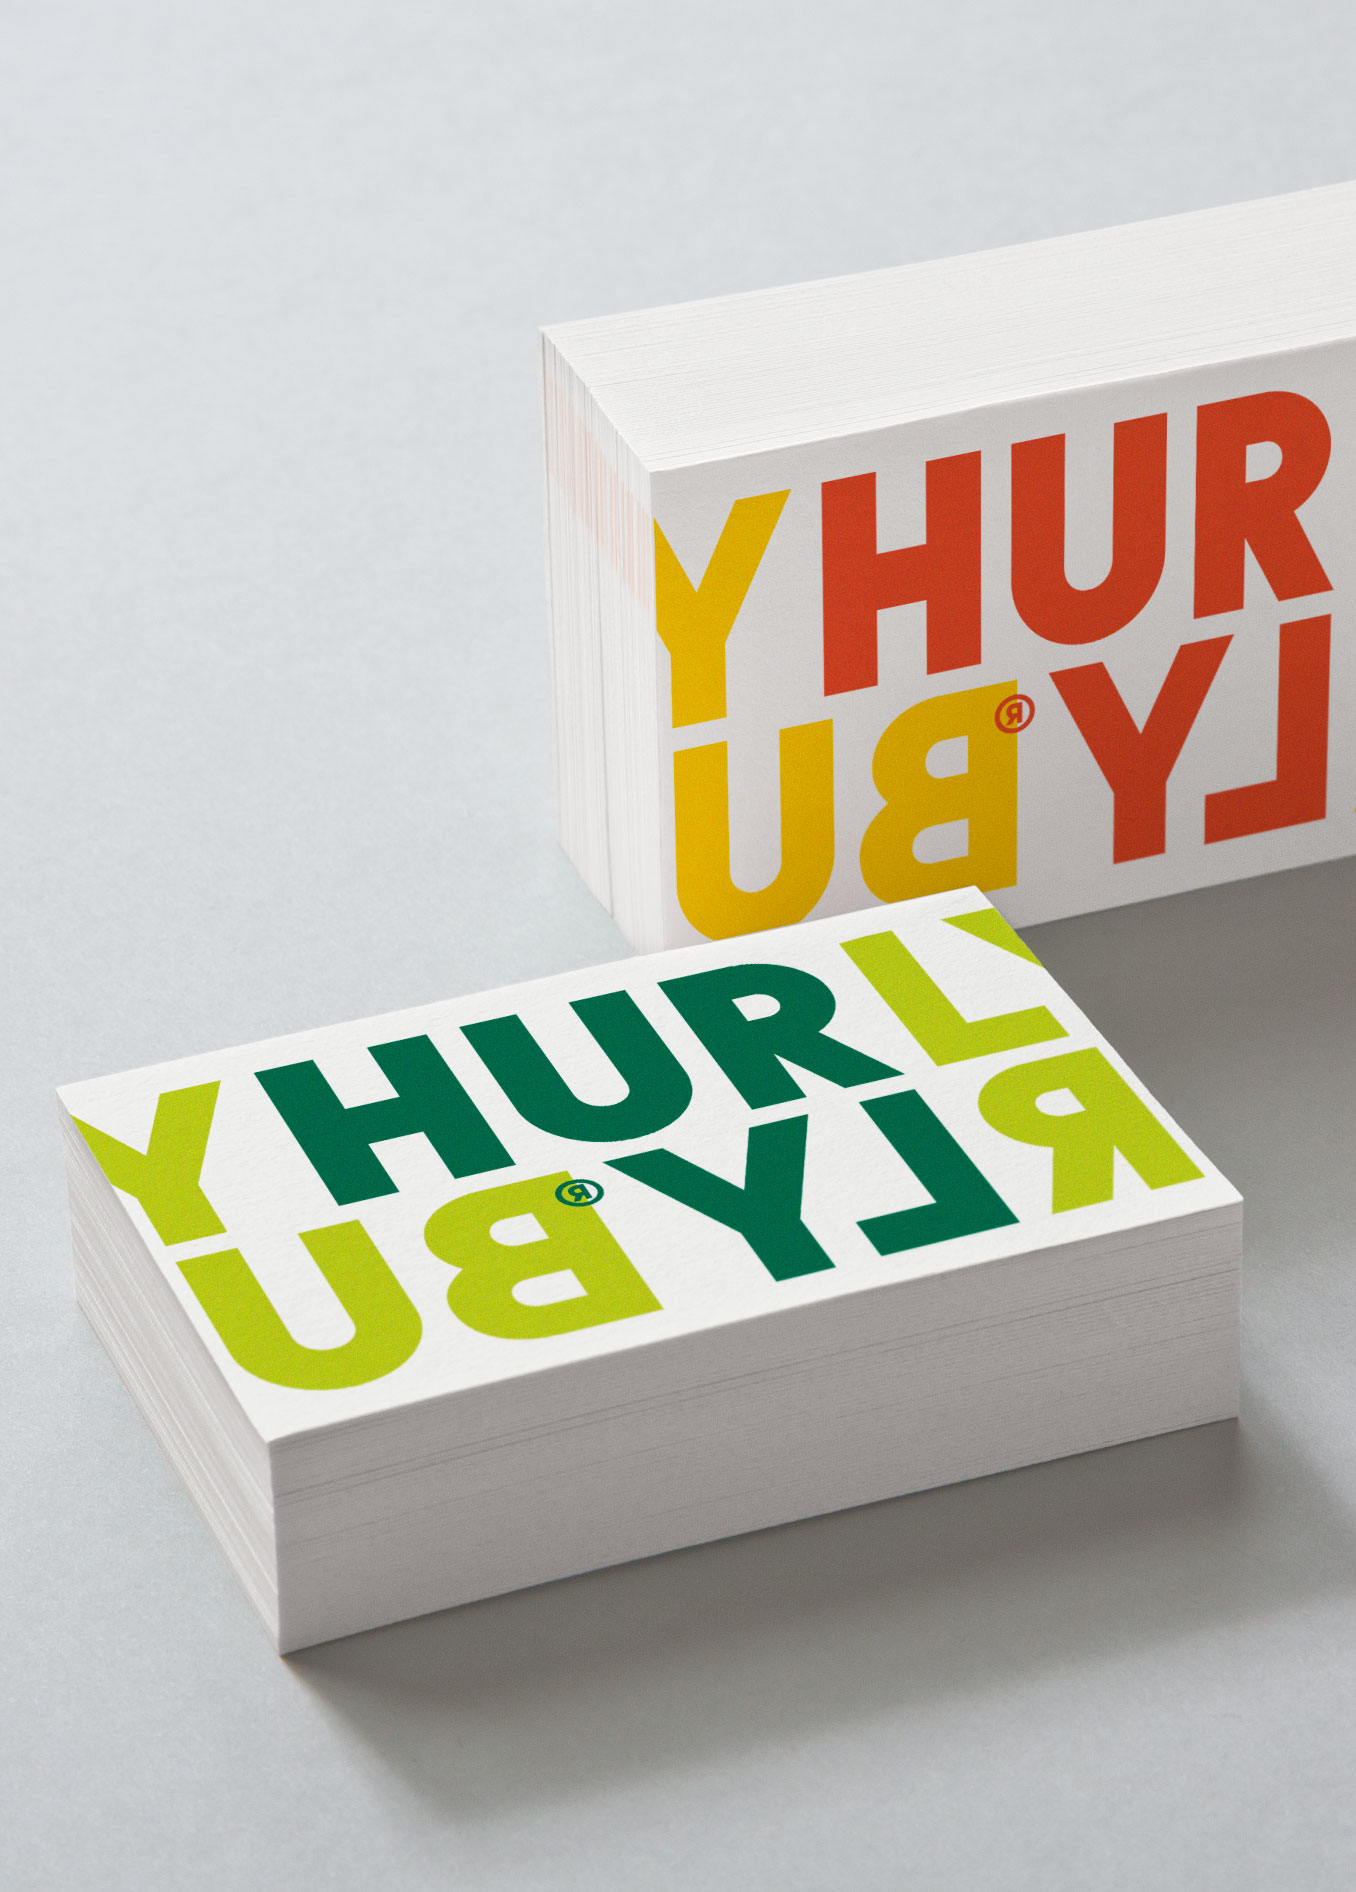 Brand identity and business cards by London-based Midday Studio for Hurly Burly and its range of raw slaw